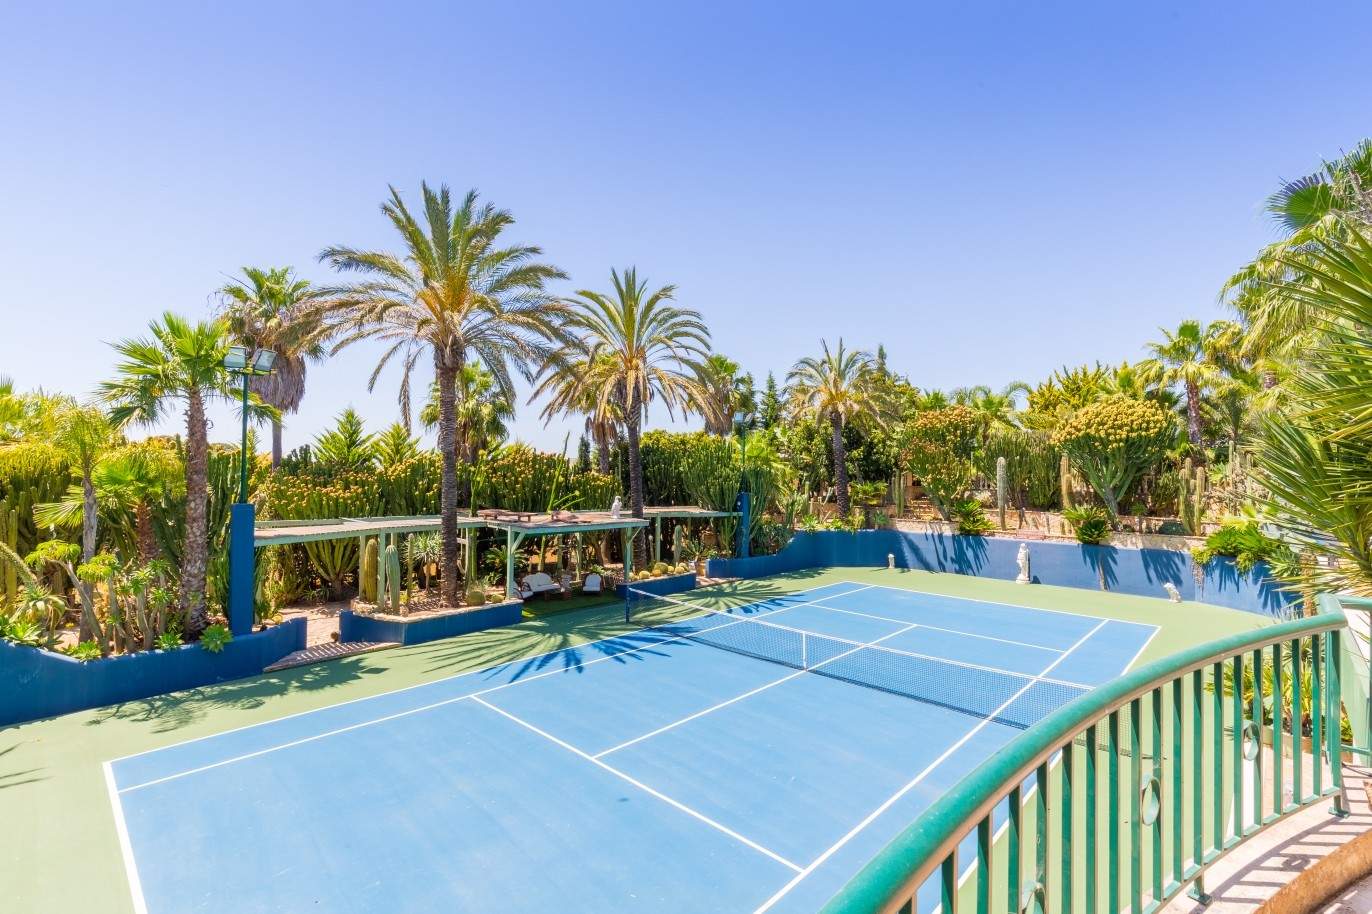 Villa for sale with pool and tennis court, Albufeira, Algarve,Portugal_59656